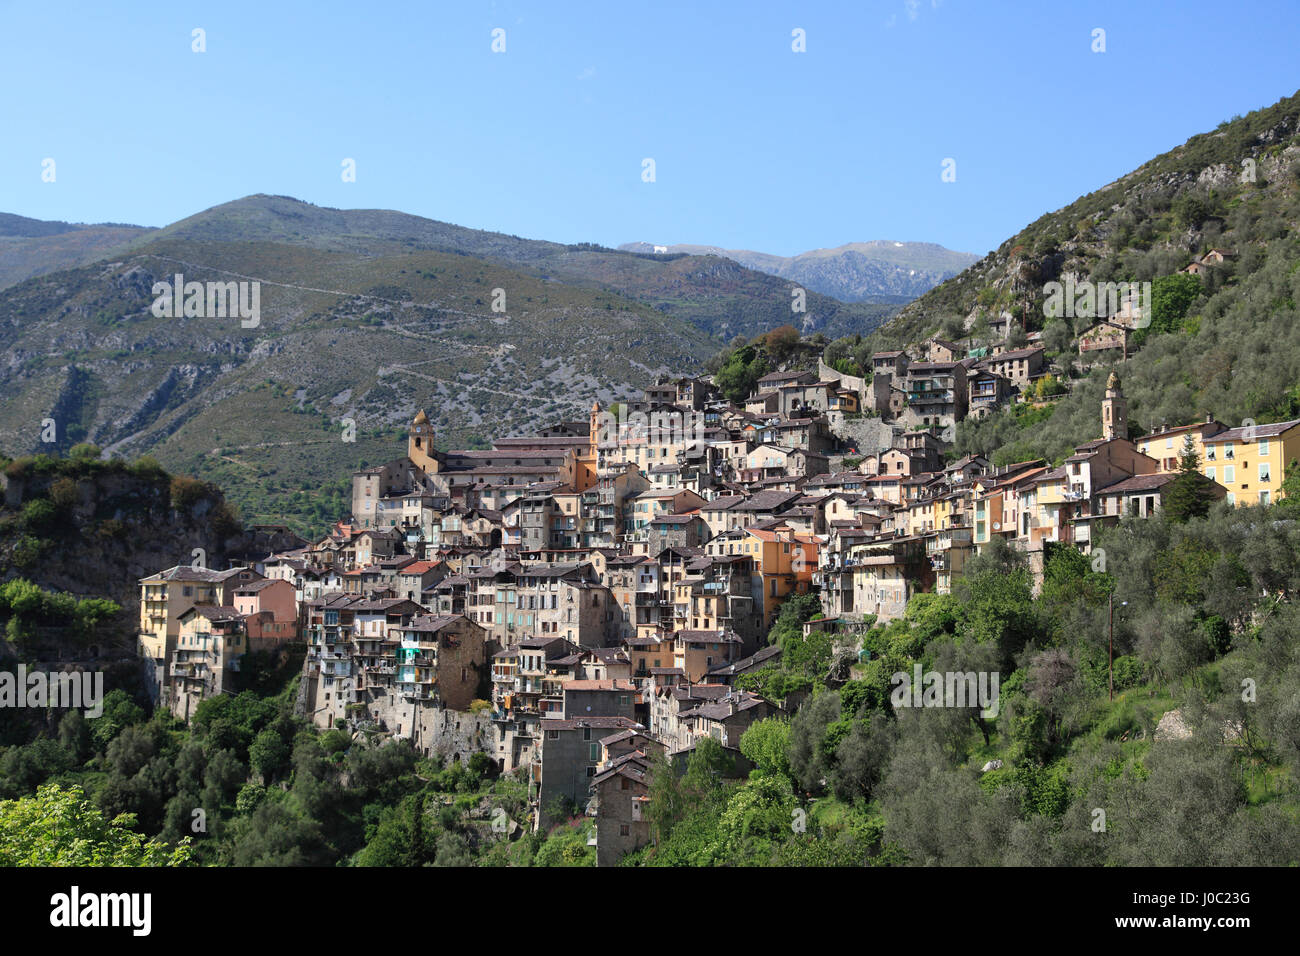 Saorge, perched Medieval village, Roya Valley, Alpes-Maritimes, Cote d'Azur, French Riviera, Provence, France Stock Photo